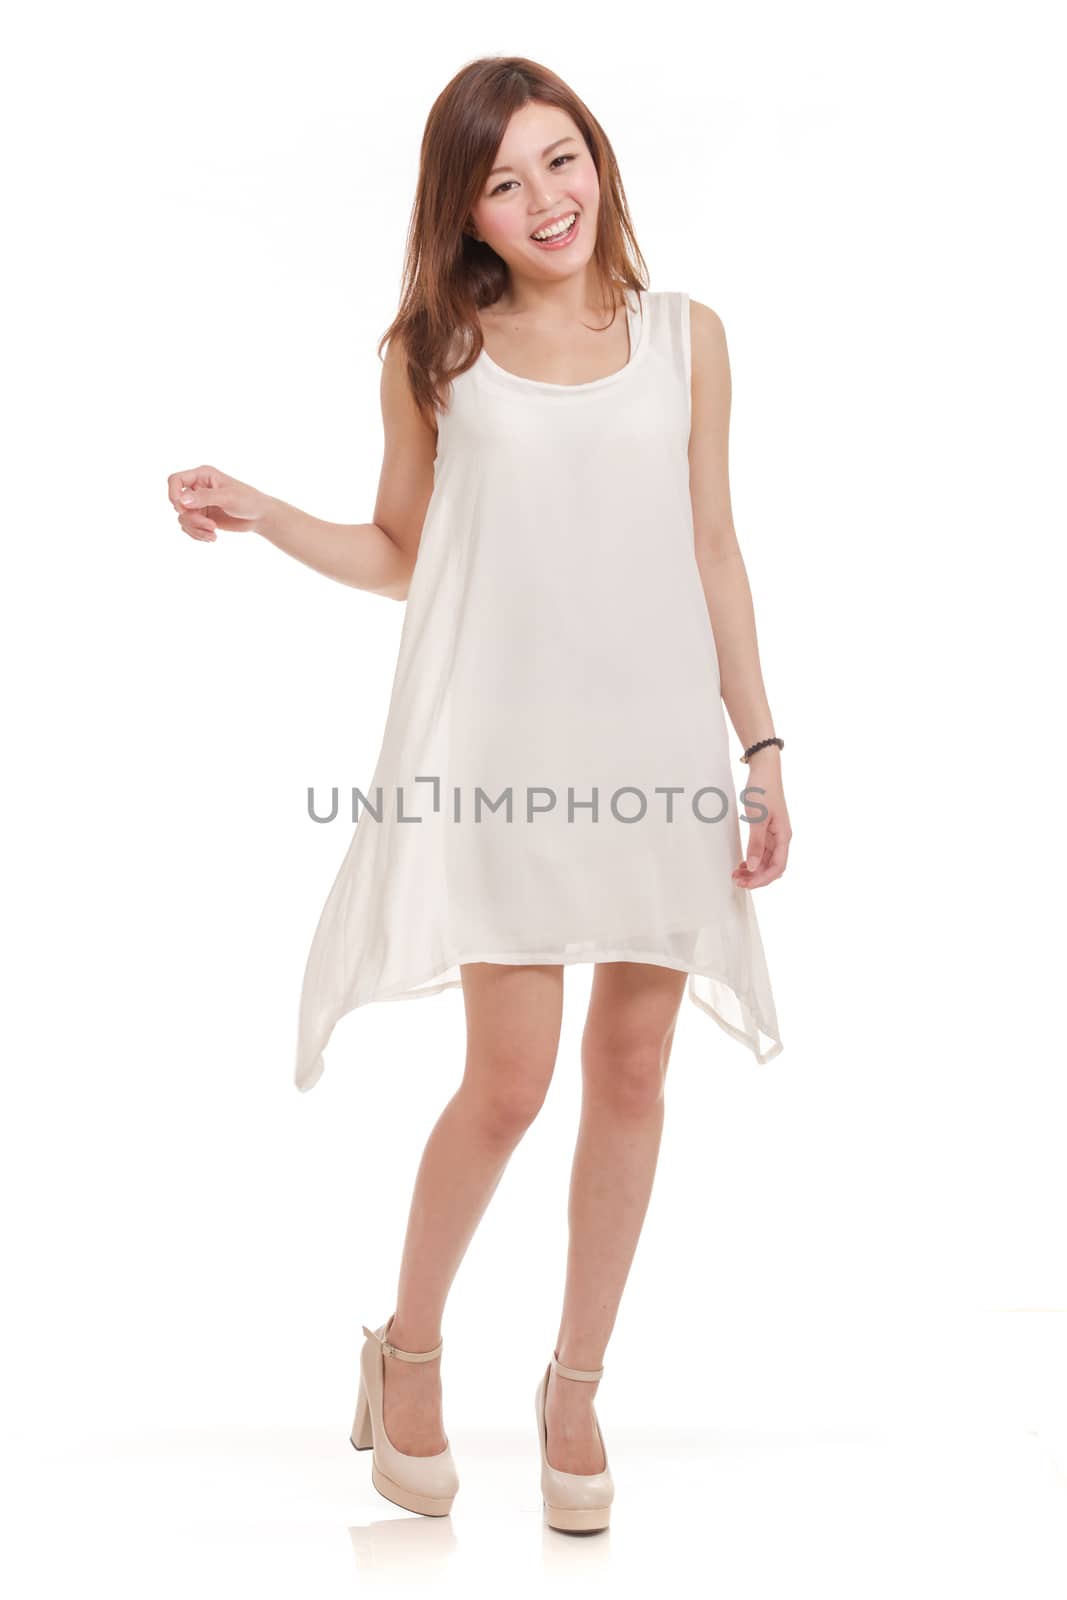 Malaysian woman in white dress surprised by imagesbykenny